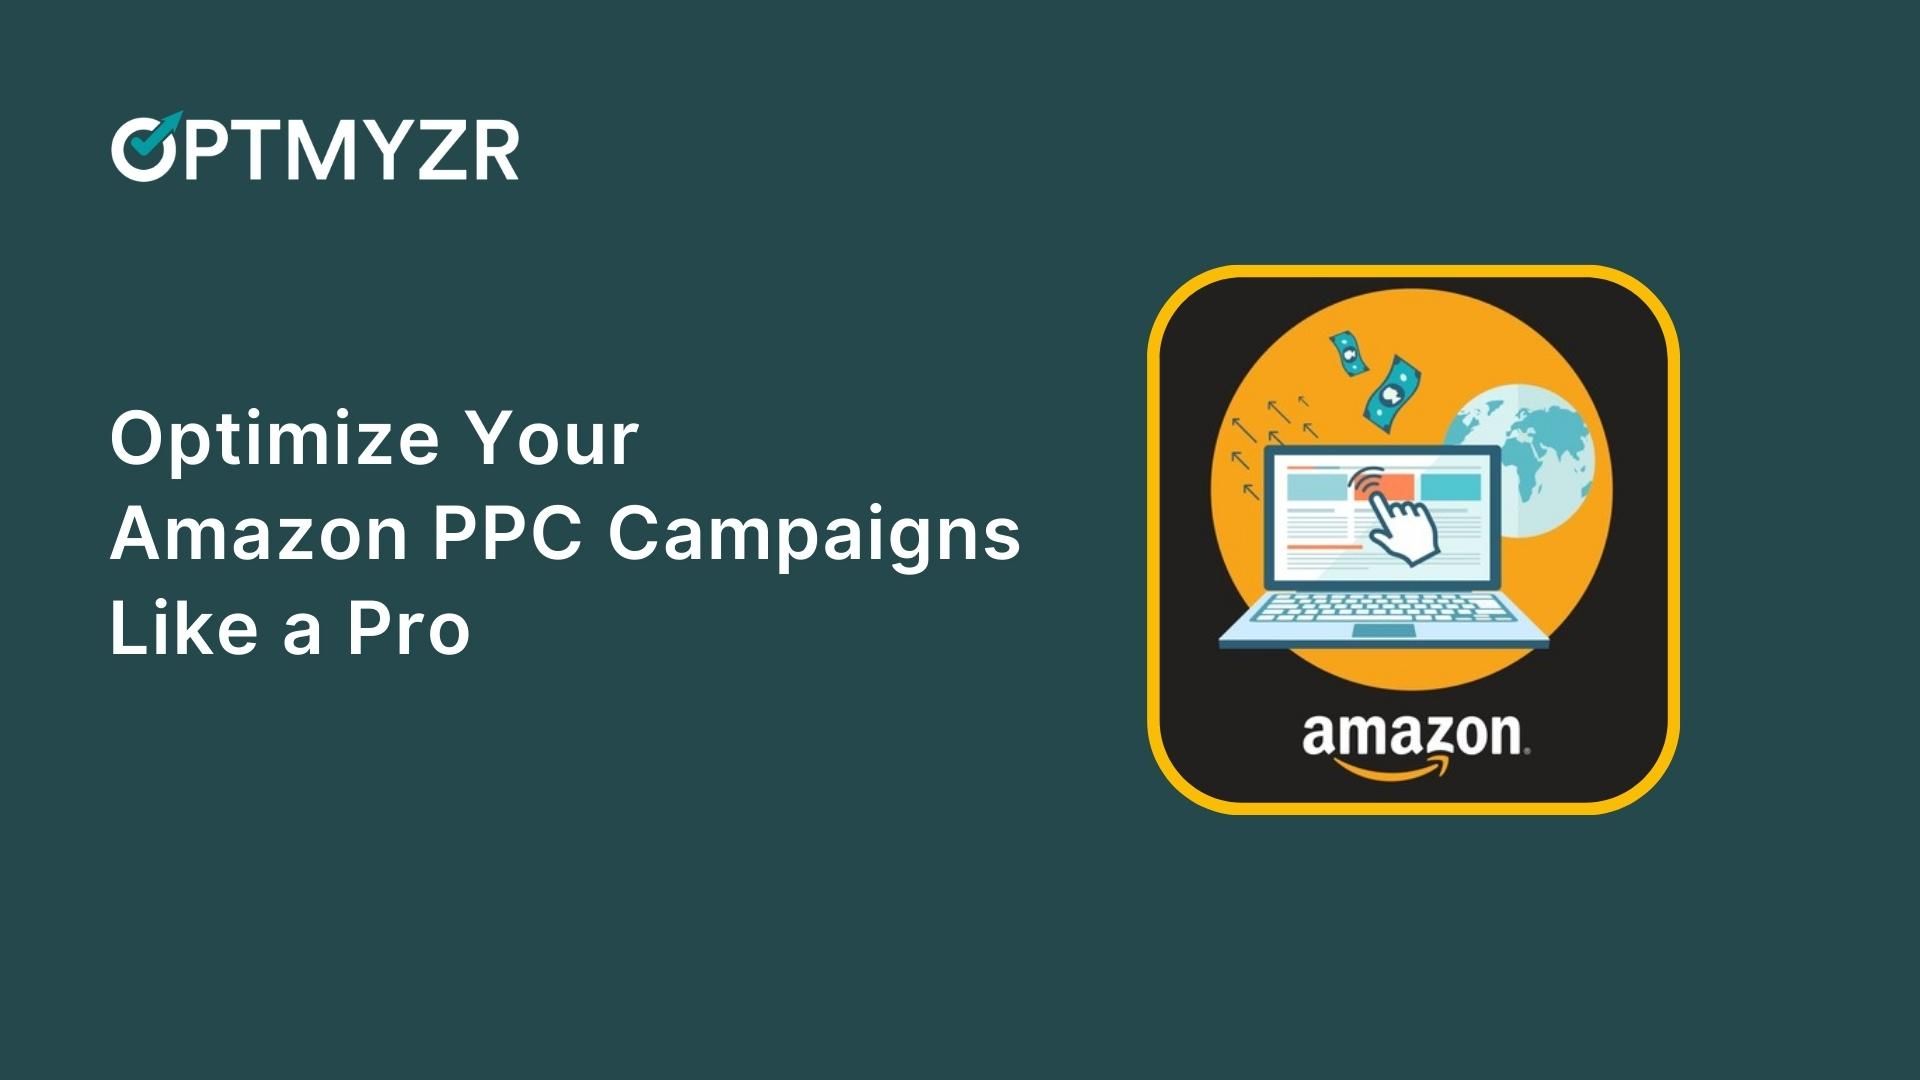 Tips to Optimize Amazon PPC Campaigns